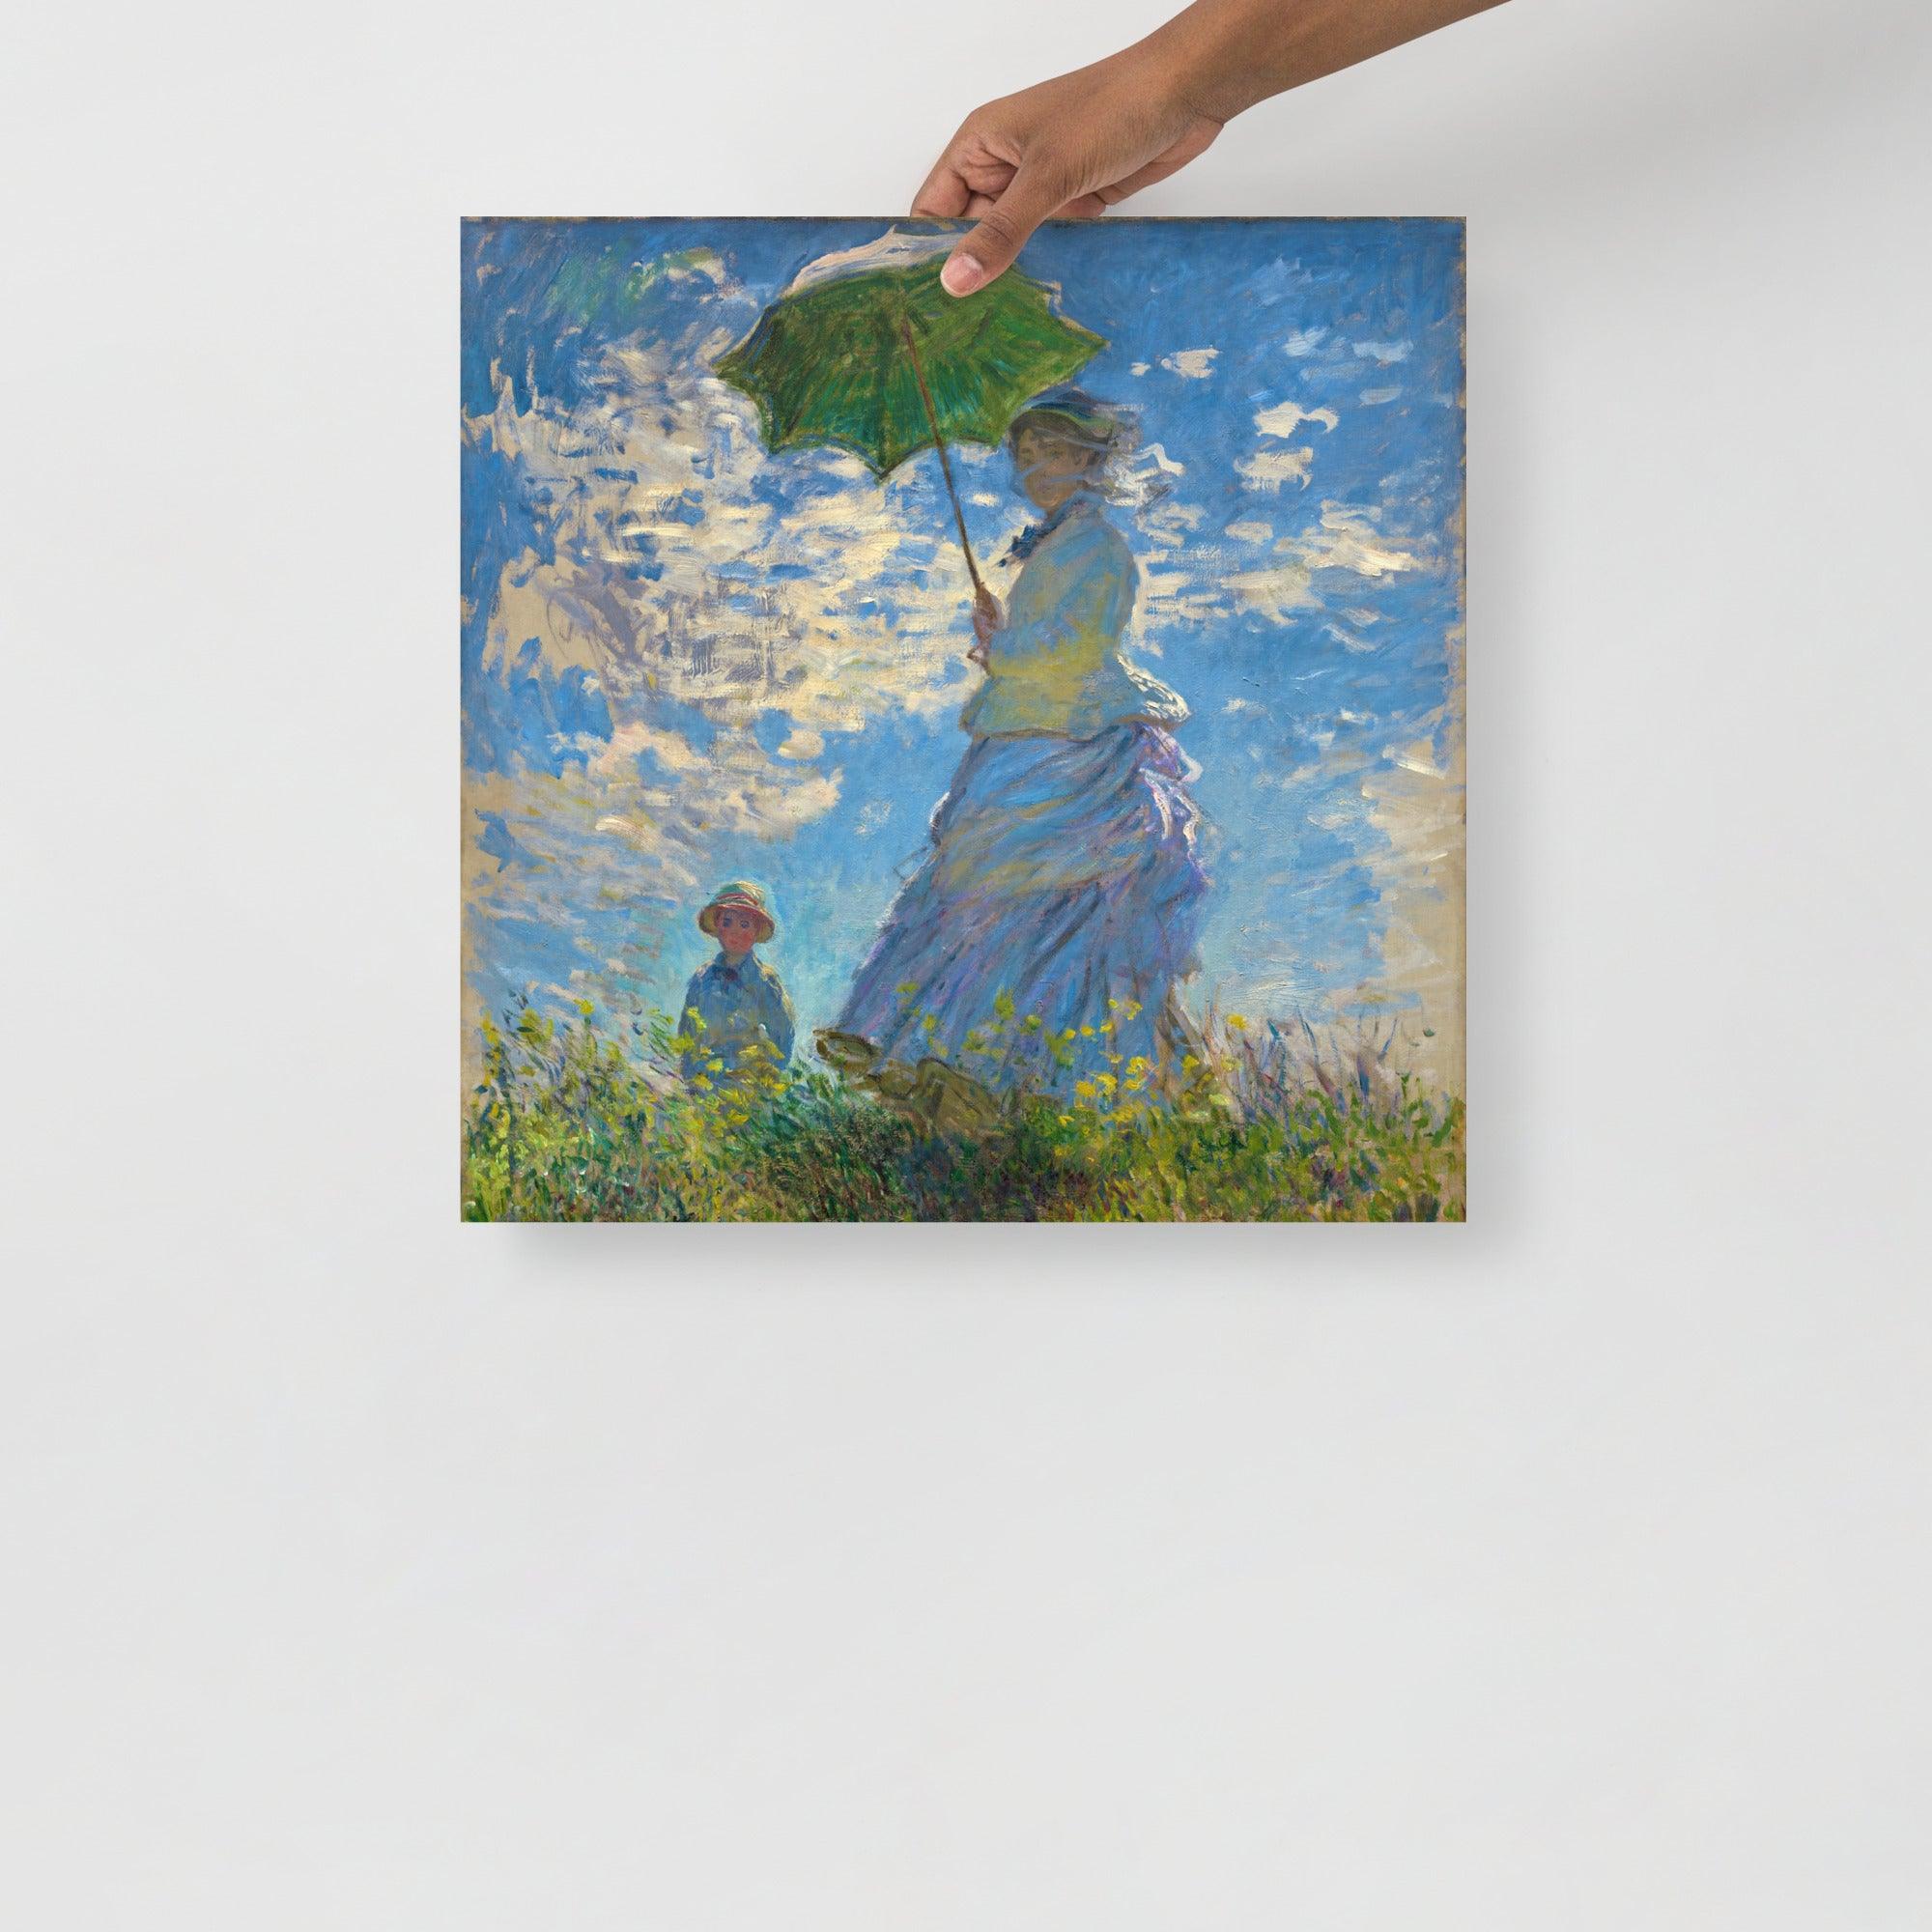 A Madame Monet and Her Son by Claude Monet poster on a plain backdrop in size 18x18”.